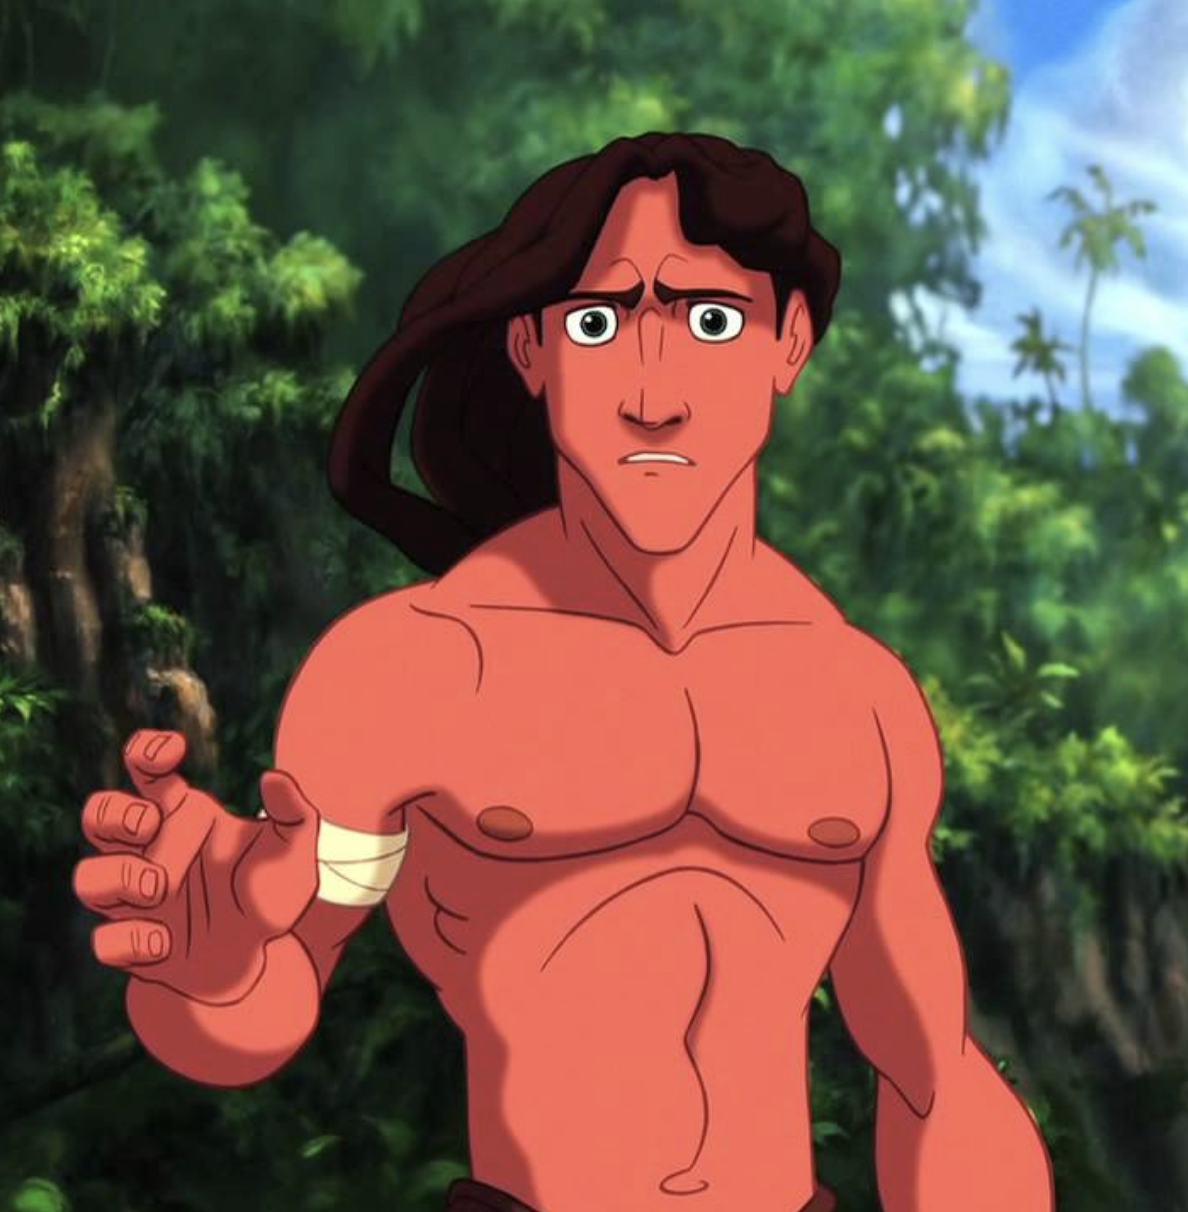 A shirtless Tarzan from the animated movie